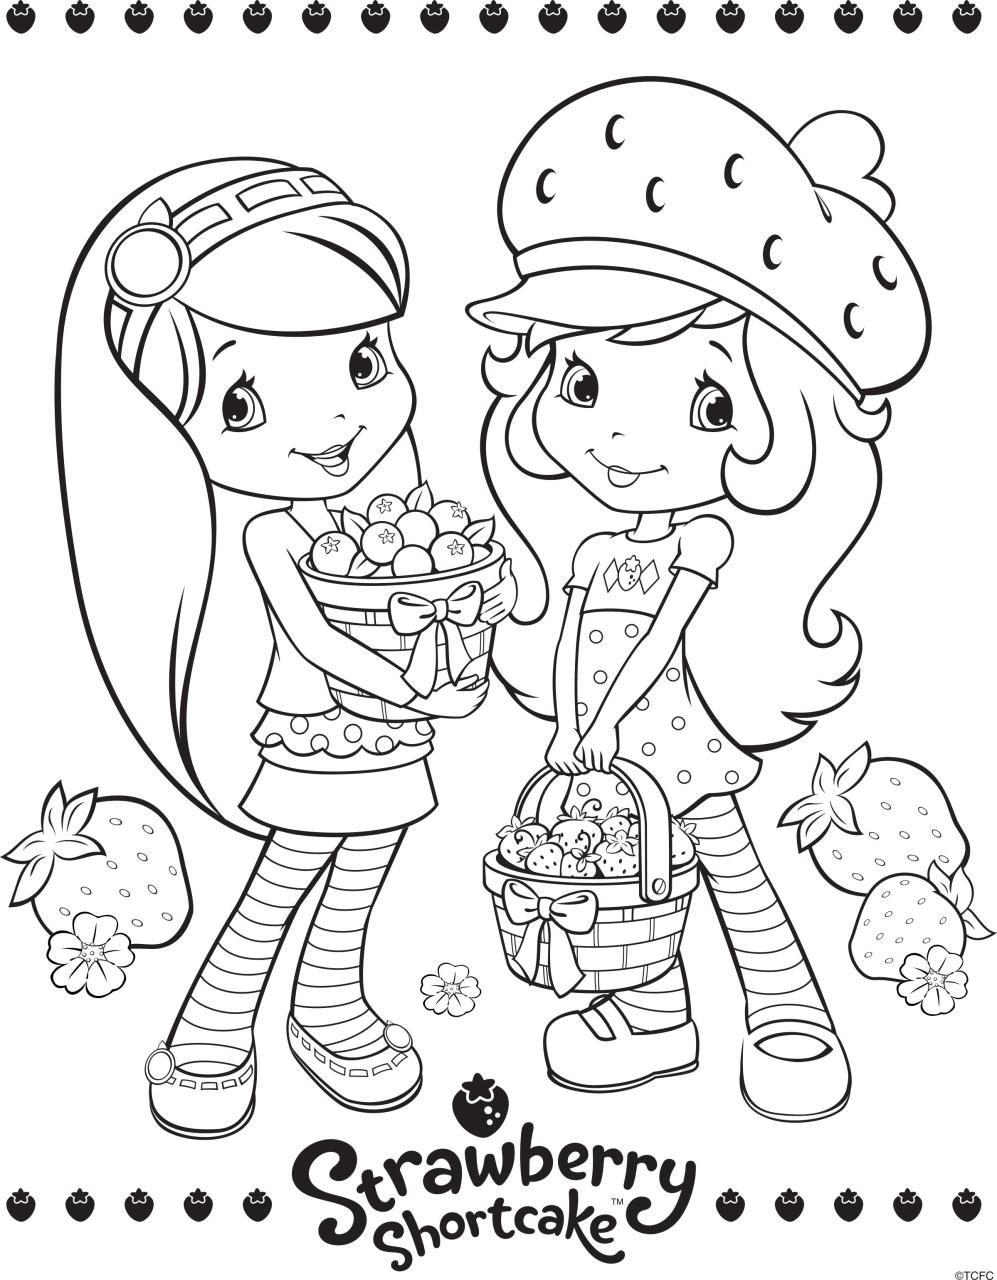 Original Strawberry Shortcake Coloring Pages